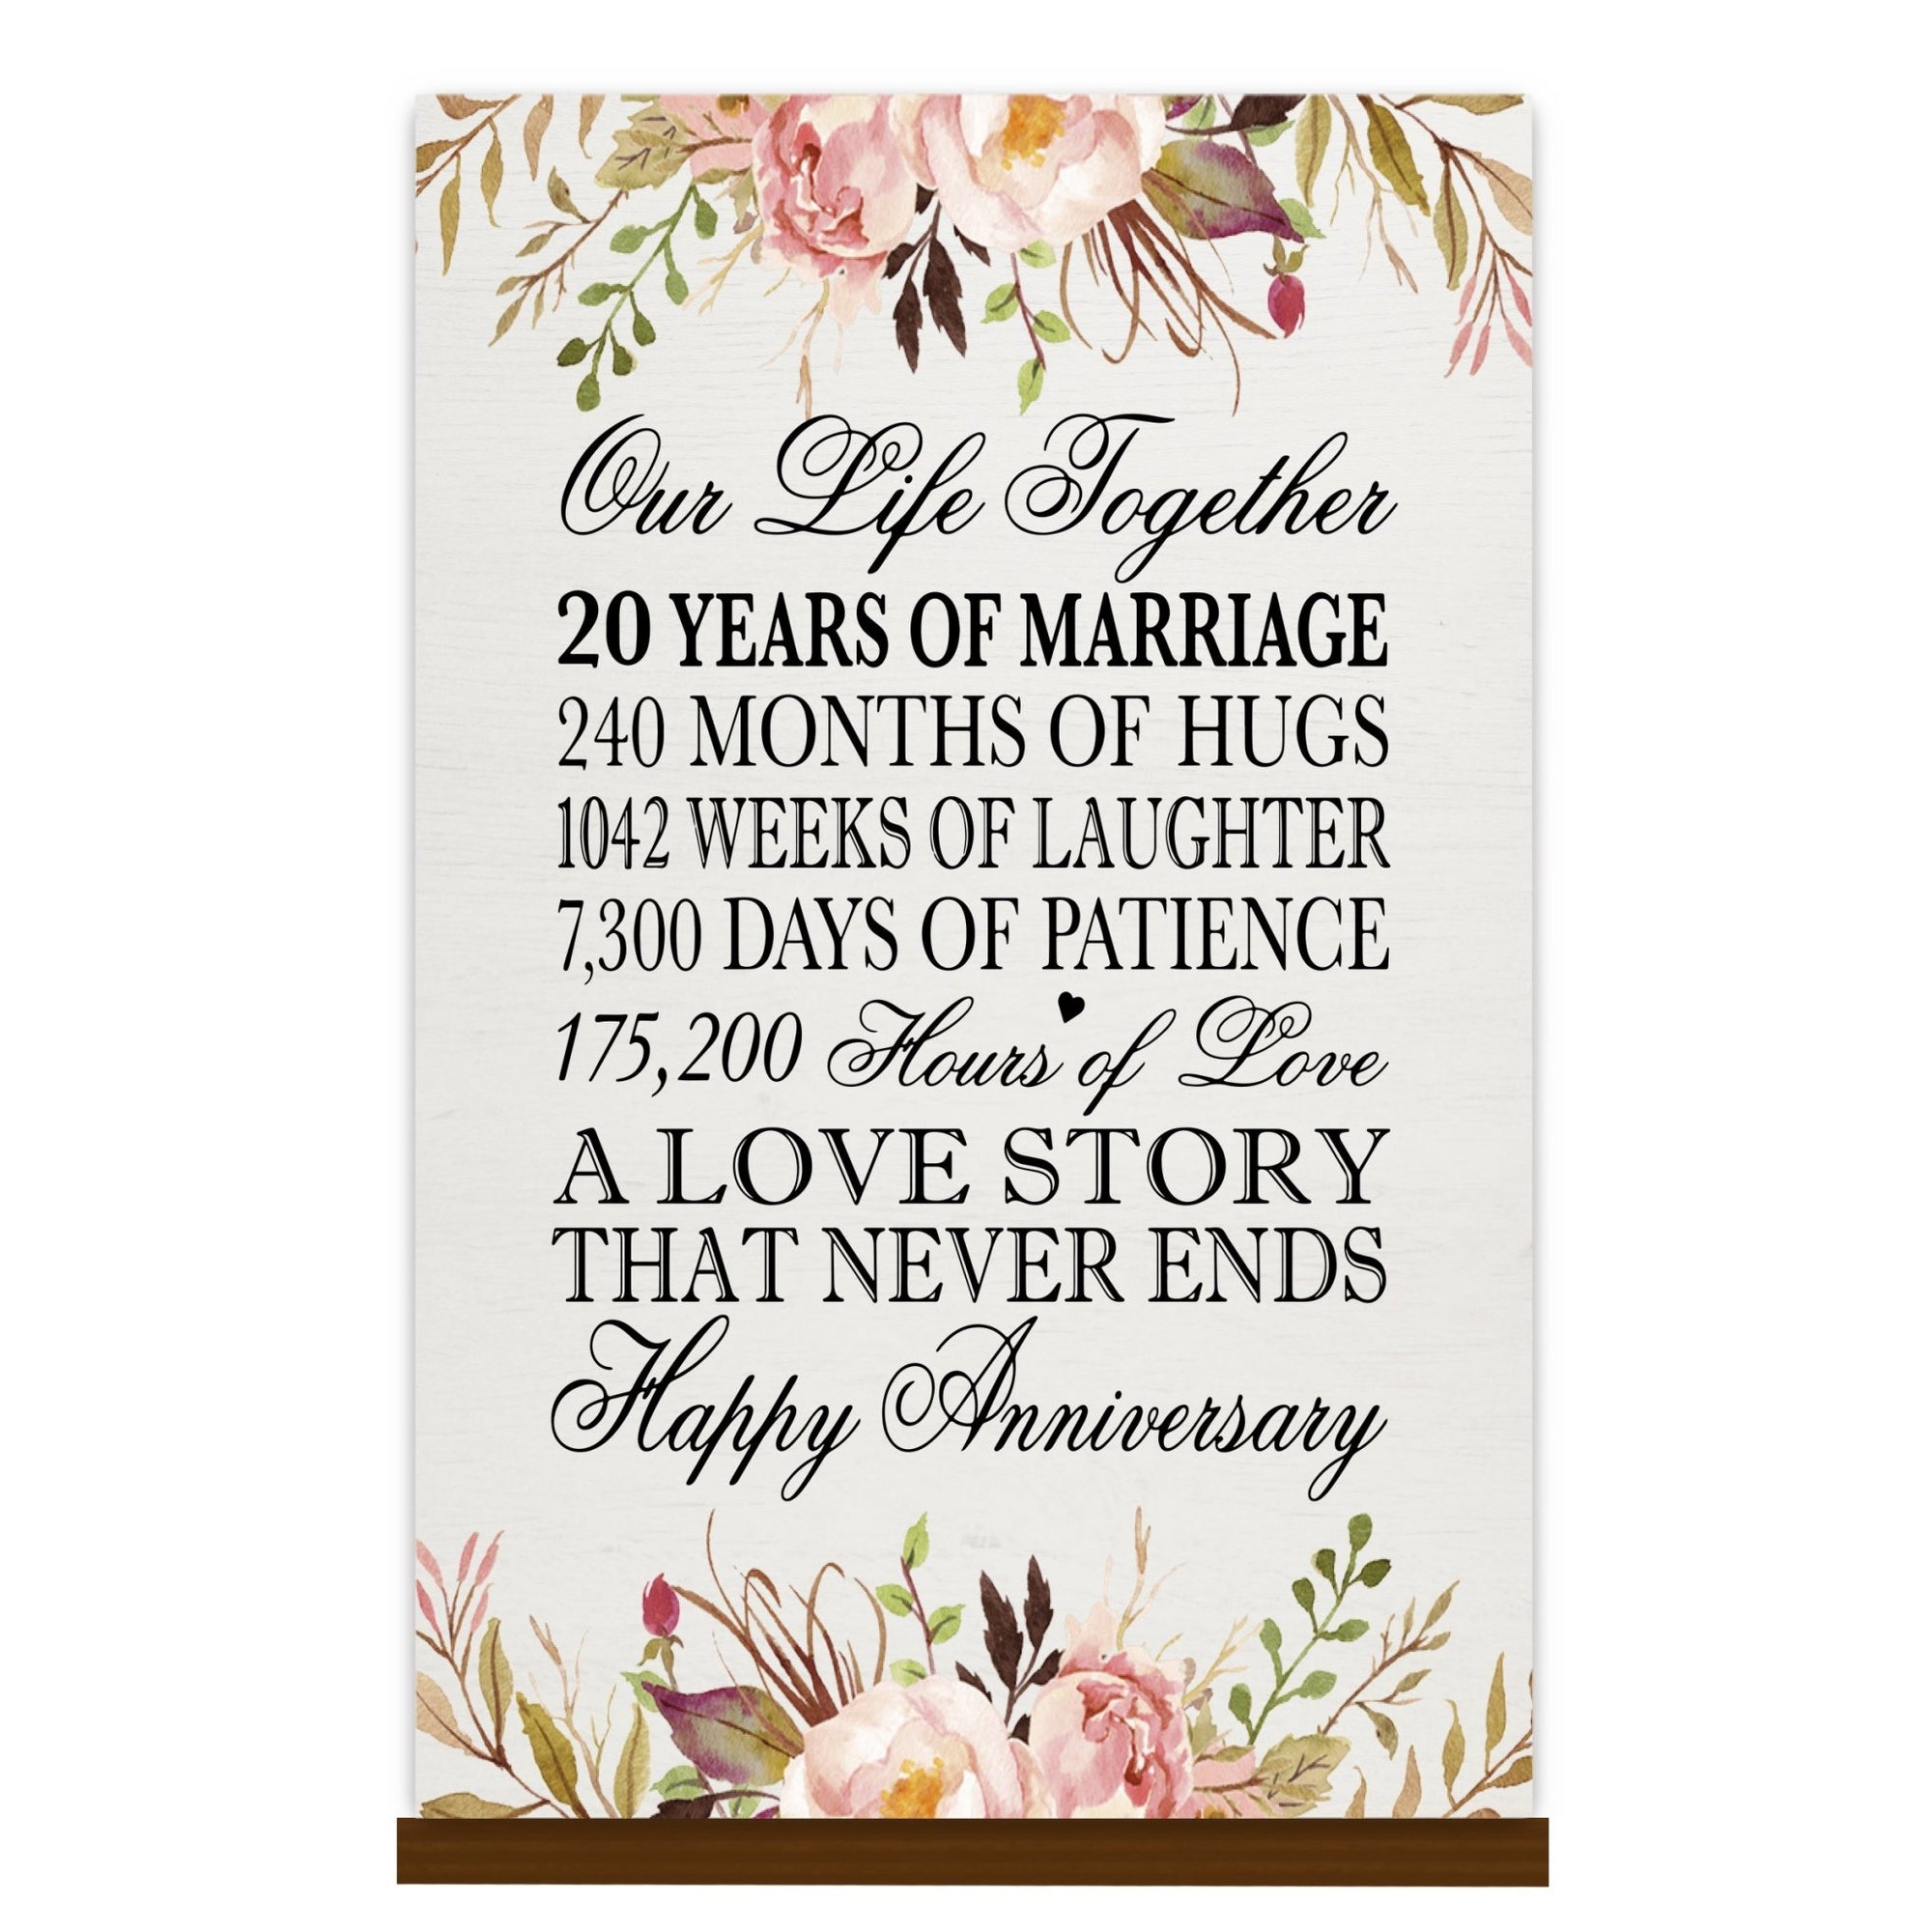 LifeSong Milestones 20th Anniversary Wall Plaque for Couples